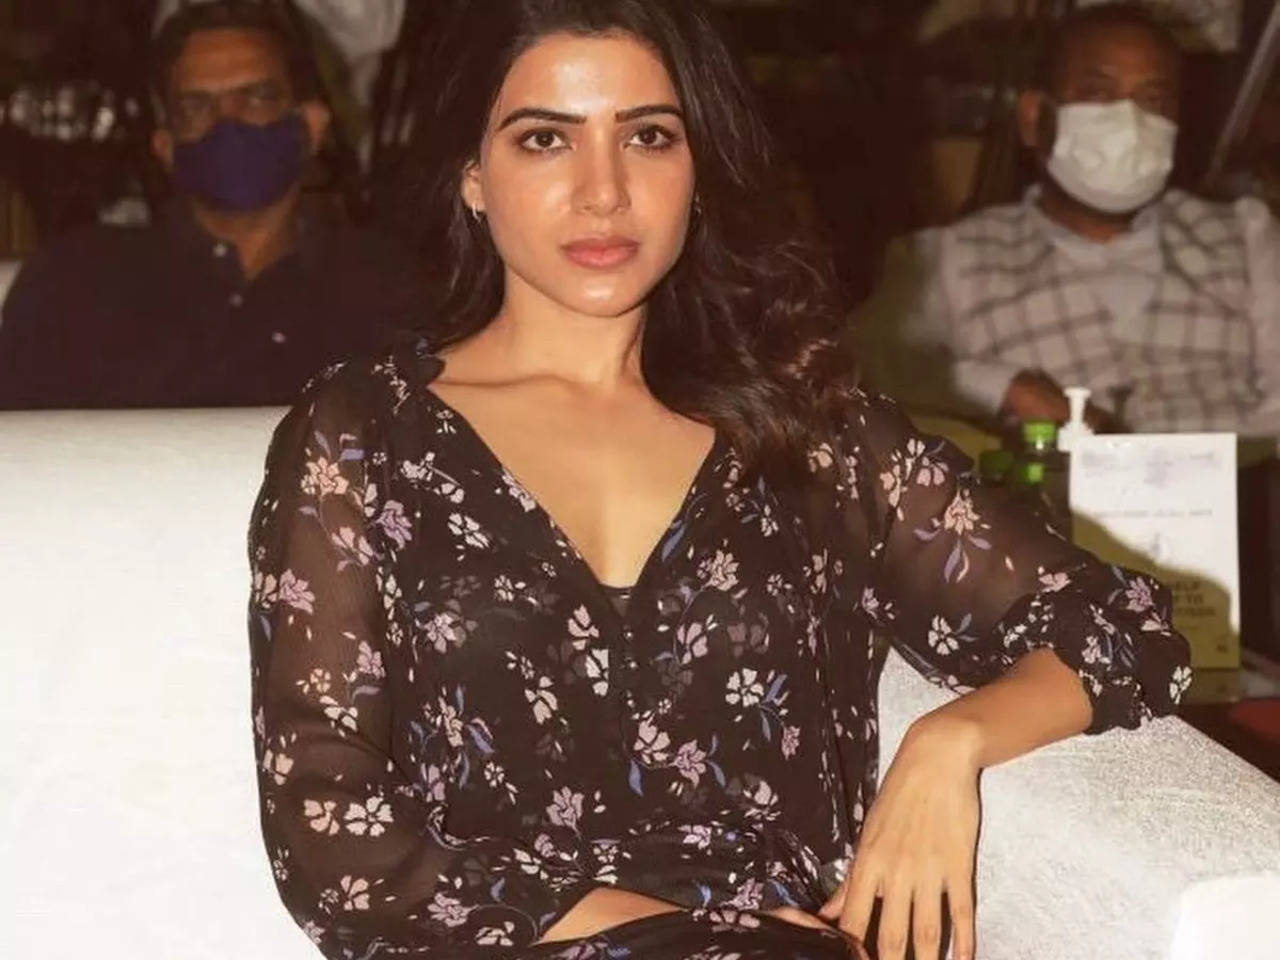 Samantha Akkineni Stuns In Her Latest 'Ready For 2021' Instagram Picture